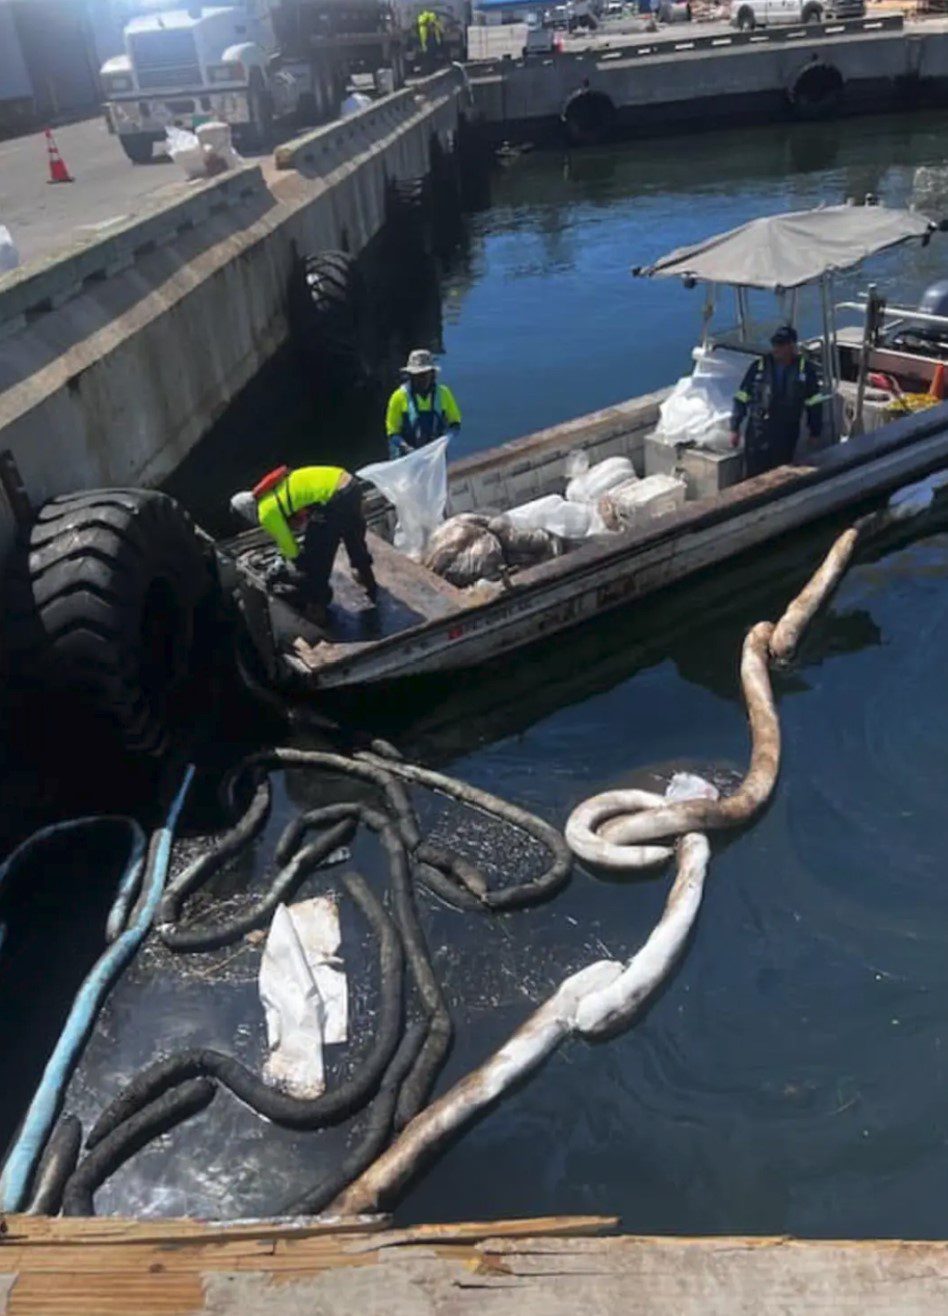 Oil spill investigation, cleanupcontinues at SeaPort Manatee